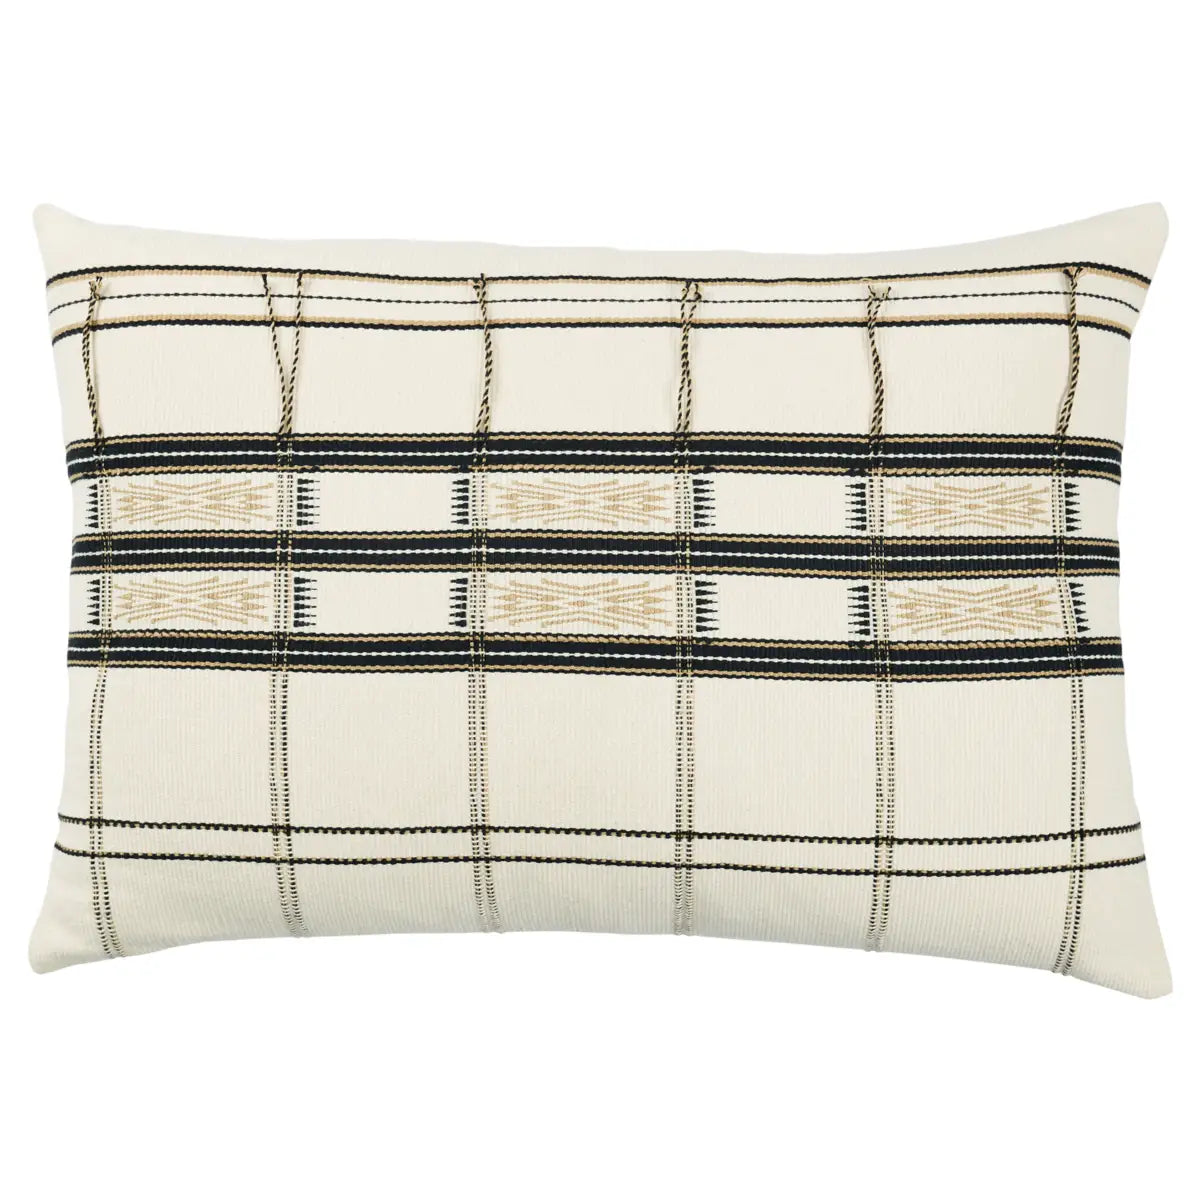 The Nagaland Merima Pillow showcases the traditional loin-loom techniques of the indigenous tribes of the region. The artisan-made Merima throw pillow effortlessly combines heritage-rich tribal and stripe patterns with a versatile black, cream, and tan colorway for a stunning statement in any space. Amethyst Home provides interior design services, furniture, rugs, and lighting in the Kansas City metro area.